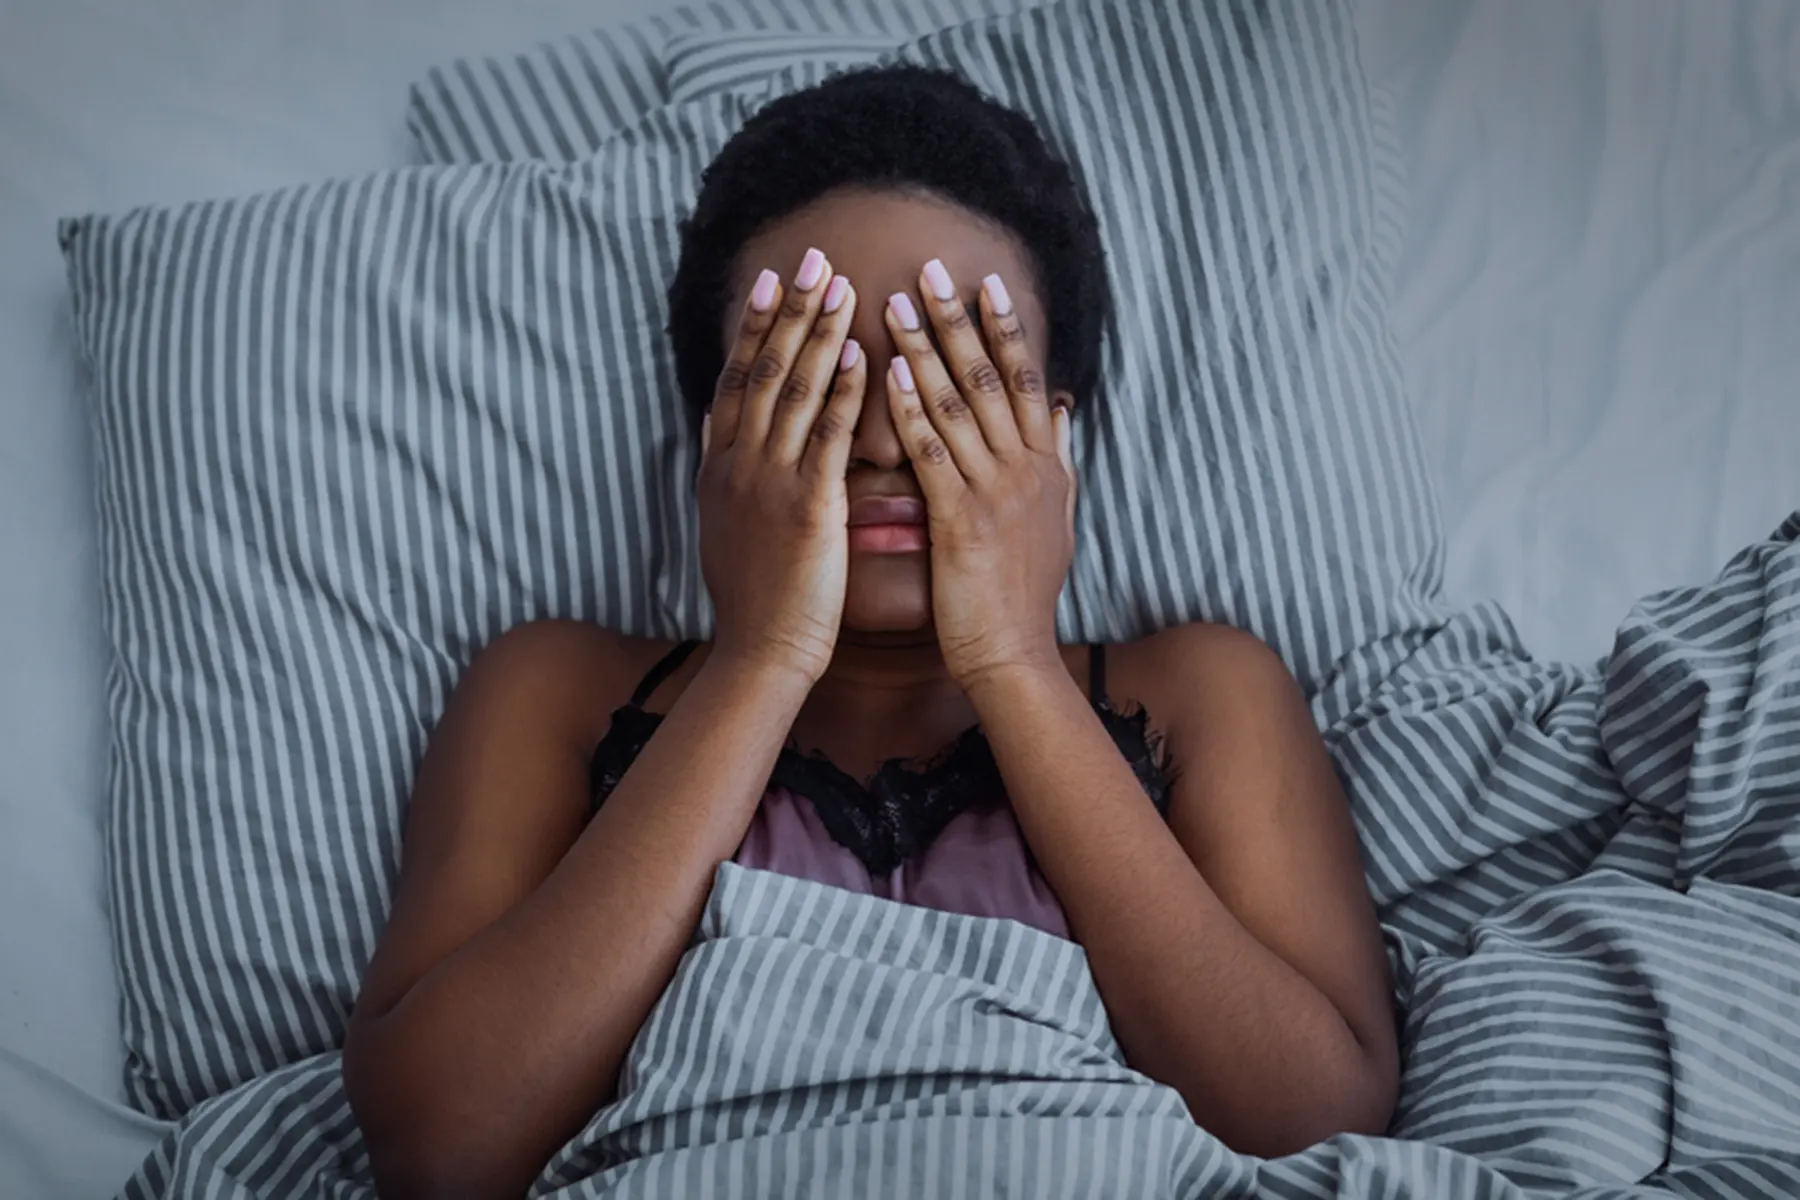   A woman lies in bed on blue and white striped sheets. Her hands are over her eyes in exhaustion, frustration, sadness, fear, or anxiety.